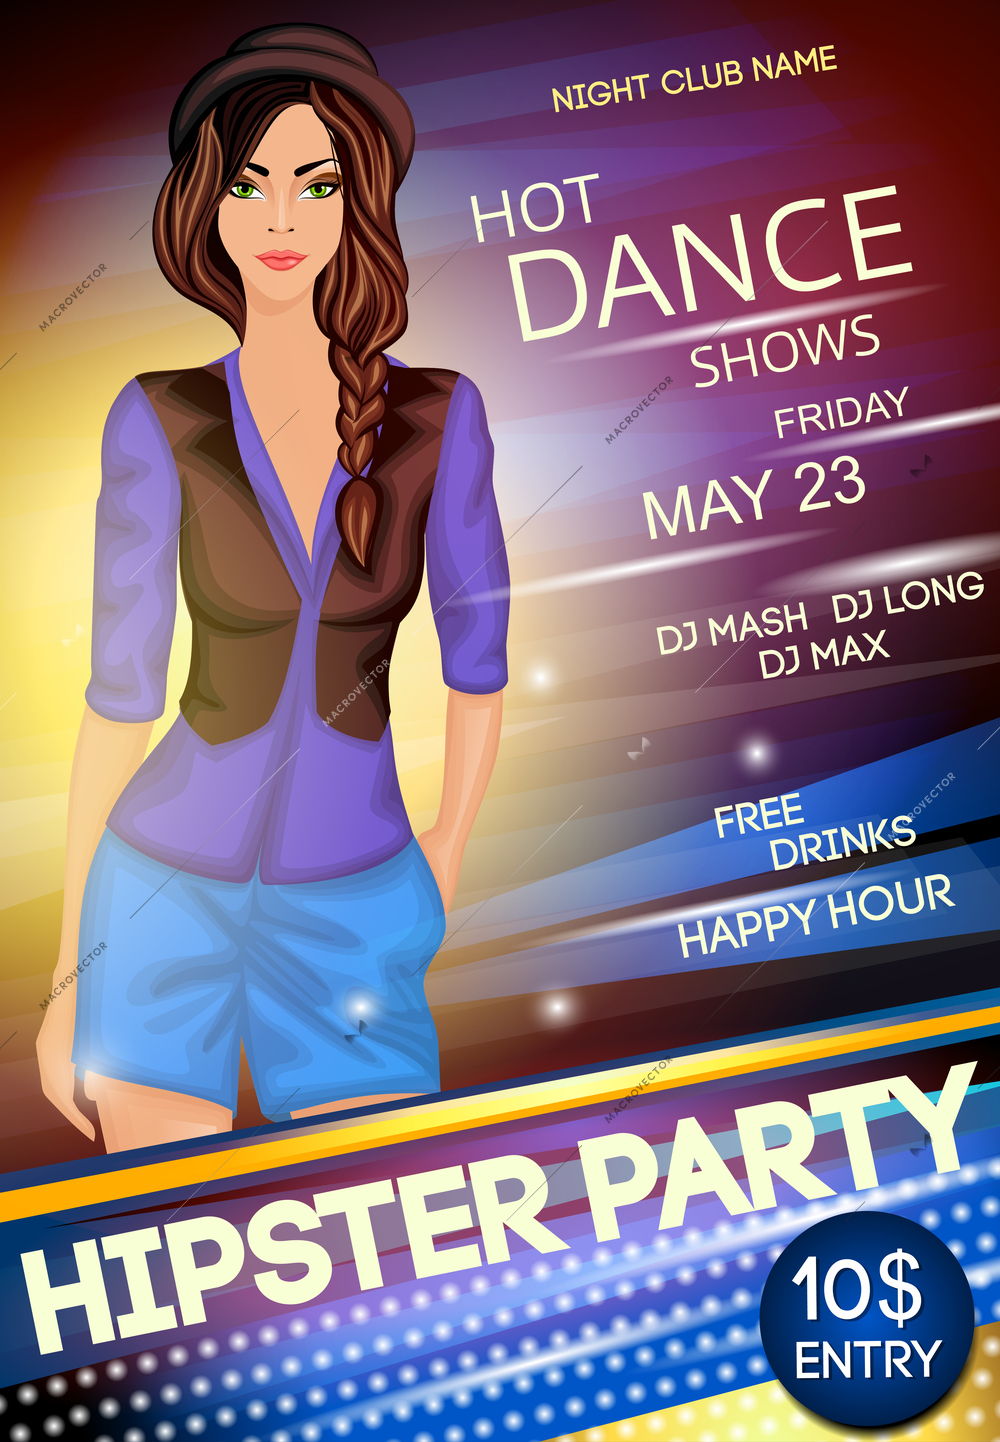 Nightclub hipster party sexy long legged girl in hat and black gilet show event poster vector illustration